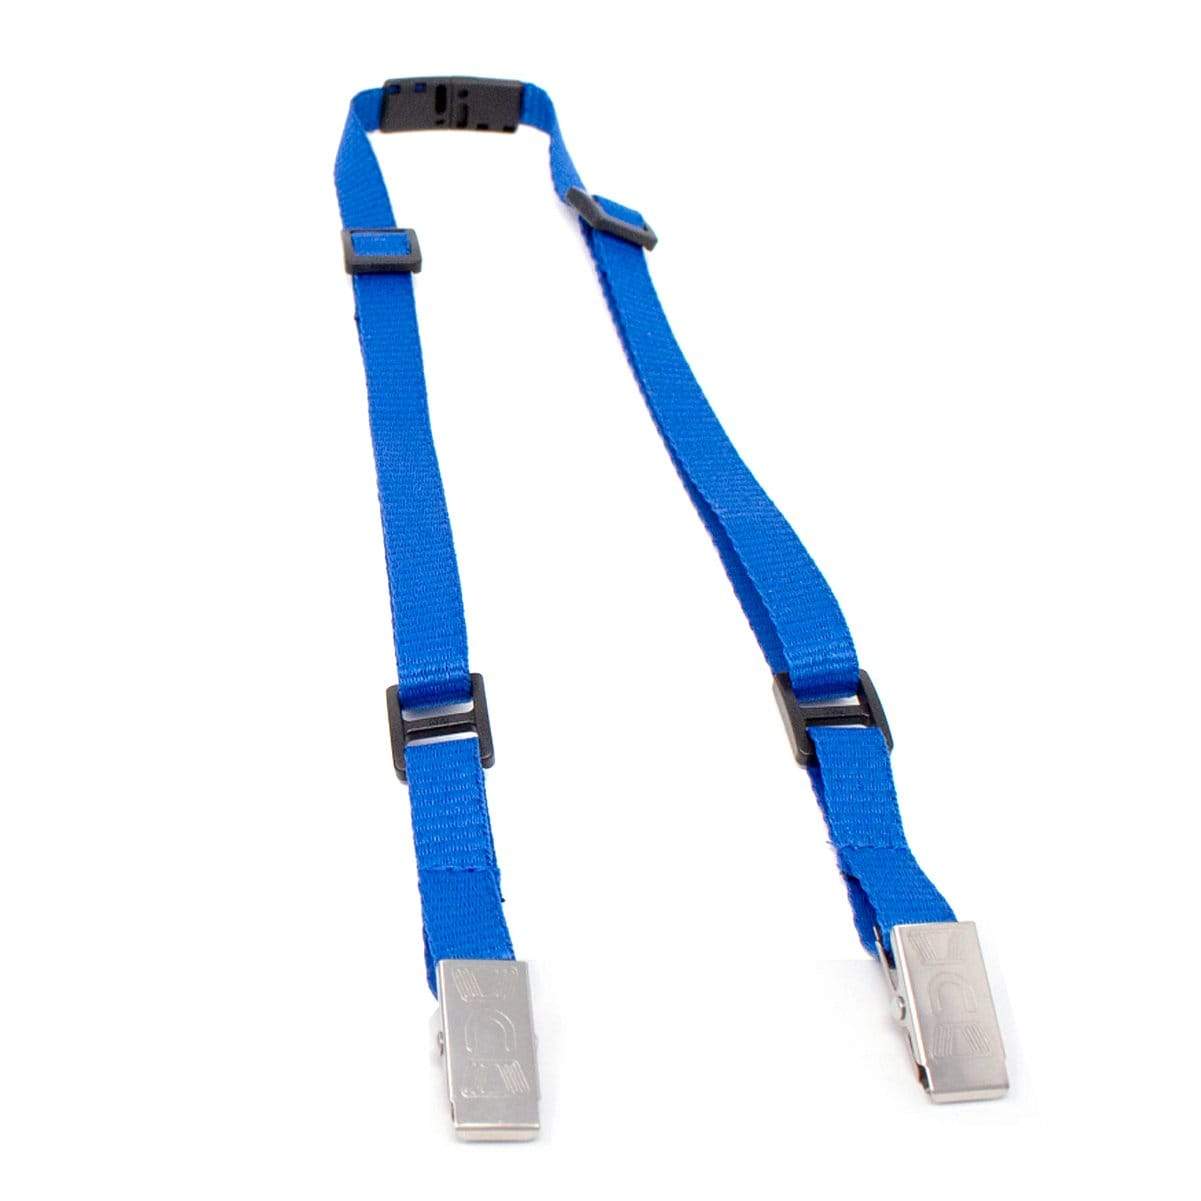 10 Pack - Lanyards with Bulldog Clip & Safety Breakaway Clasp by Specialist  ID